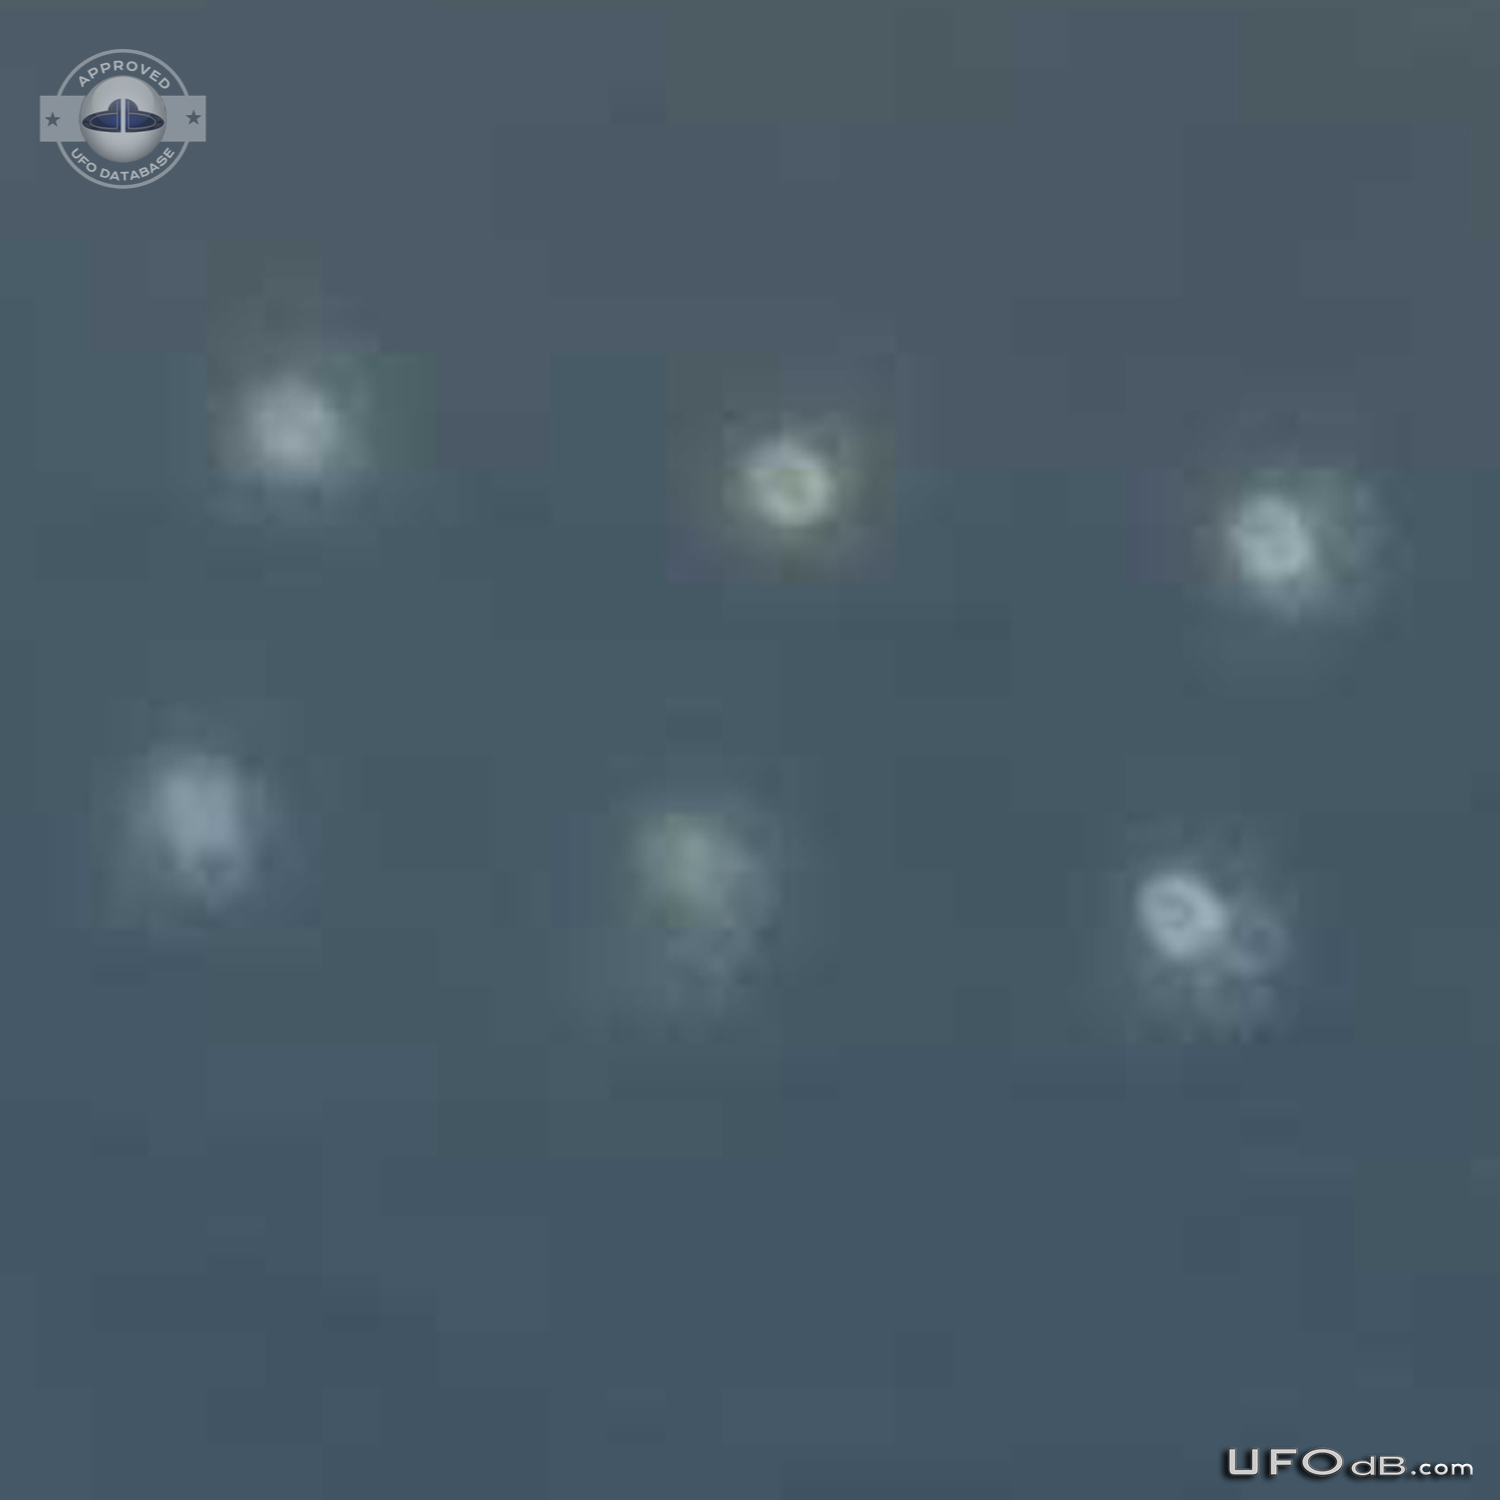 Pictures shot from bus reveals six ufos in a rectangle formation UFO Picture #383-7